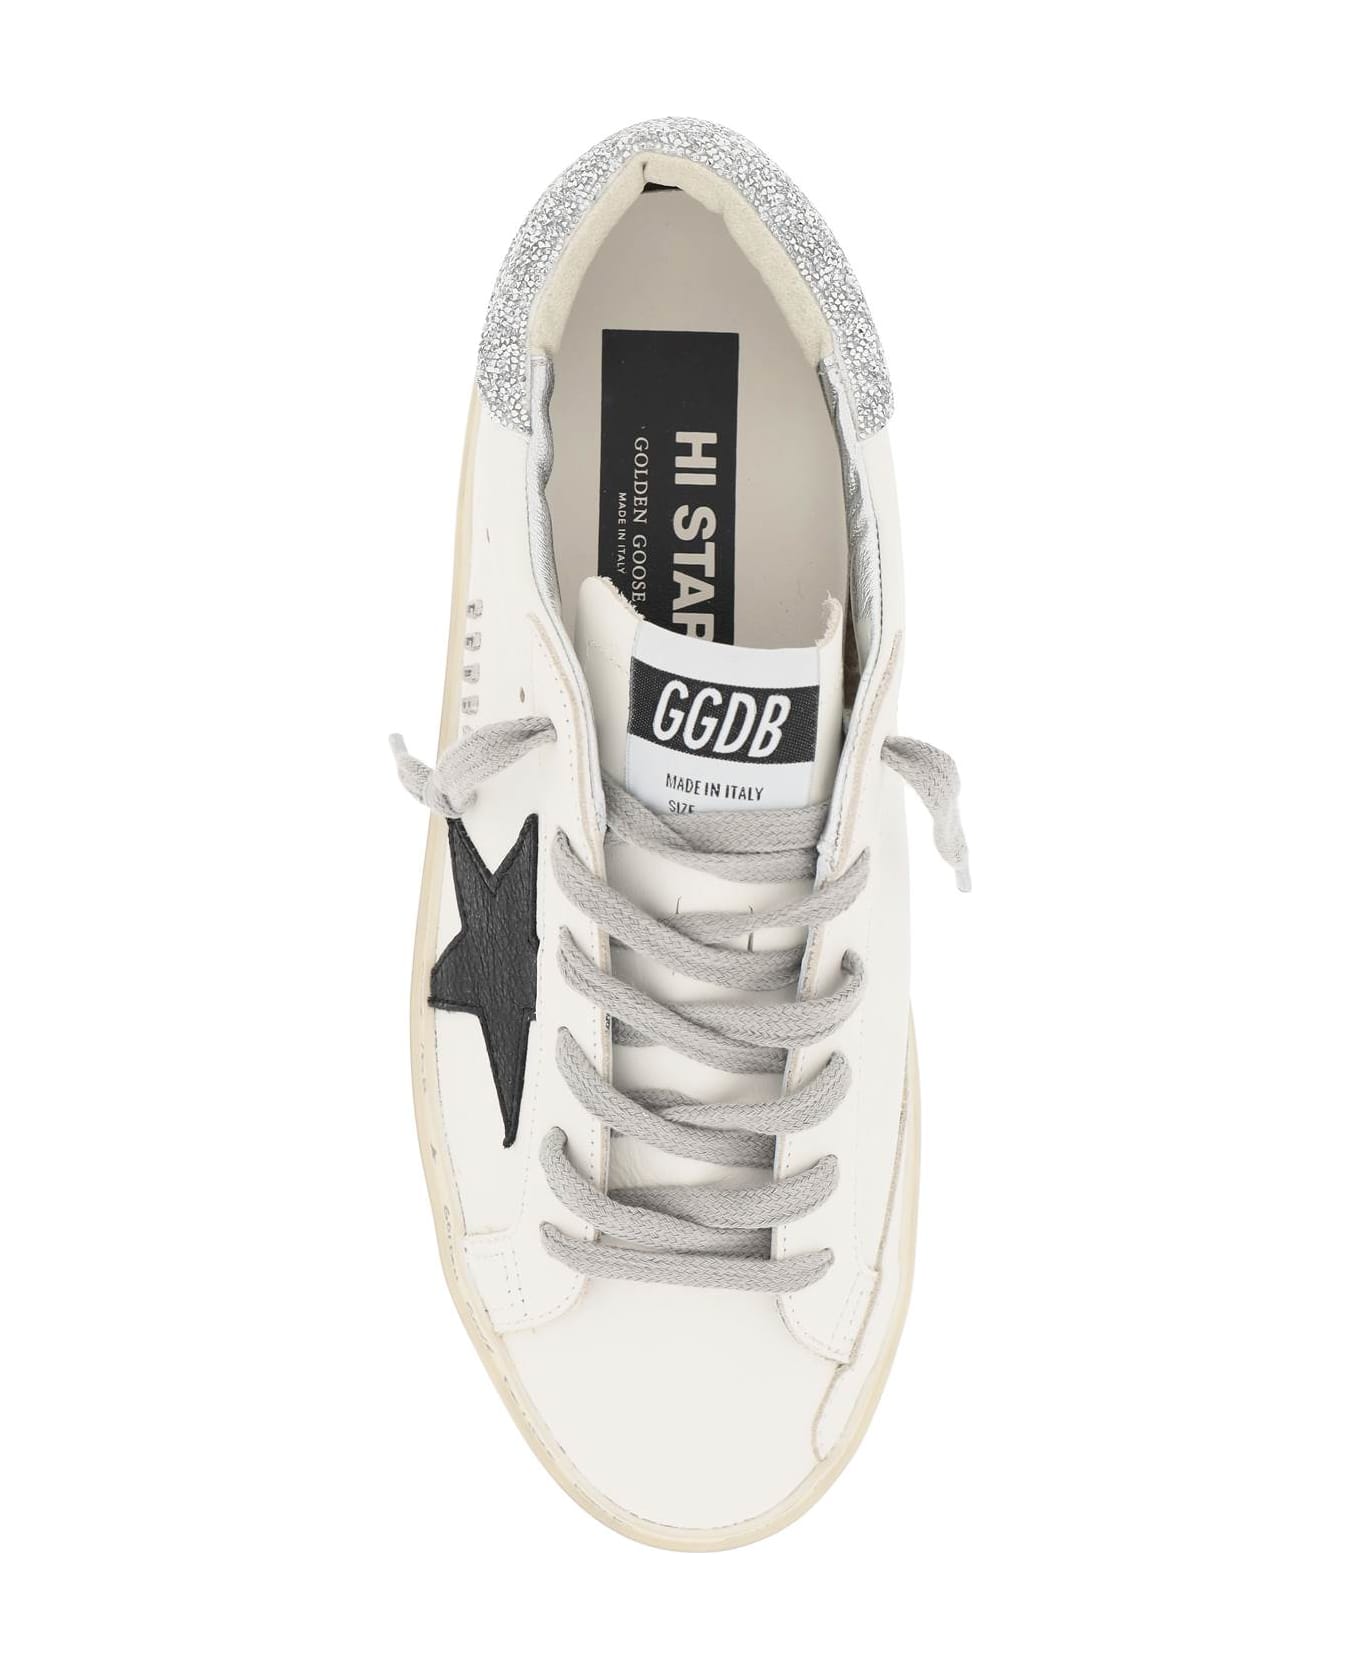 Golden Goose Hi Star Classic Leather Sneakers - WHITE BLACK SILVER (Black)